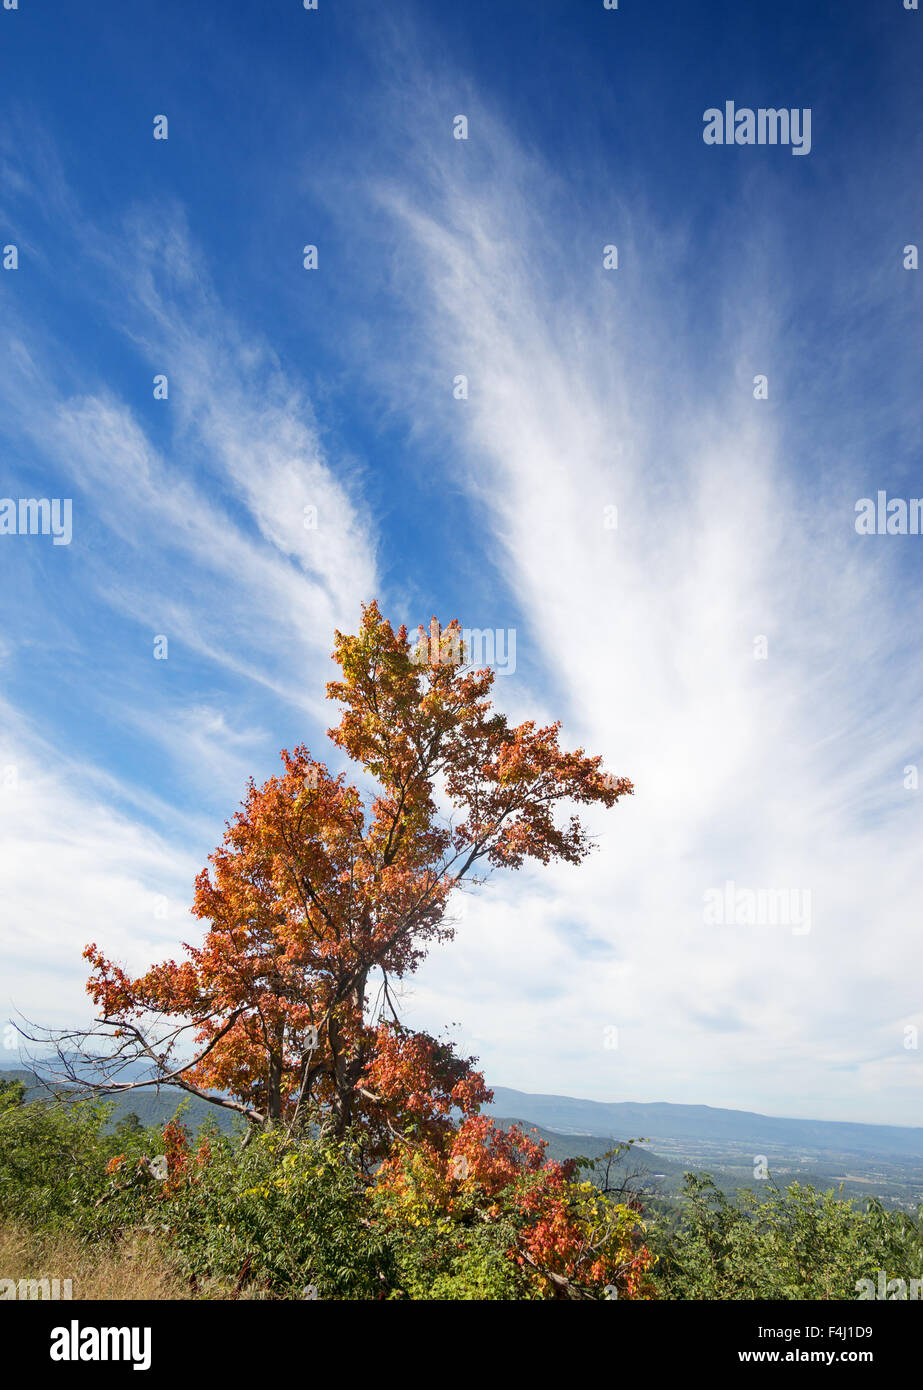 Tree with autumn foliage and blue sky with white clouds Skyline Drive, Shenandoah National Park, Virginia, USA Stock Photo